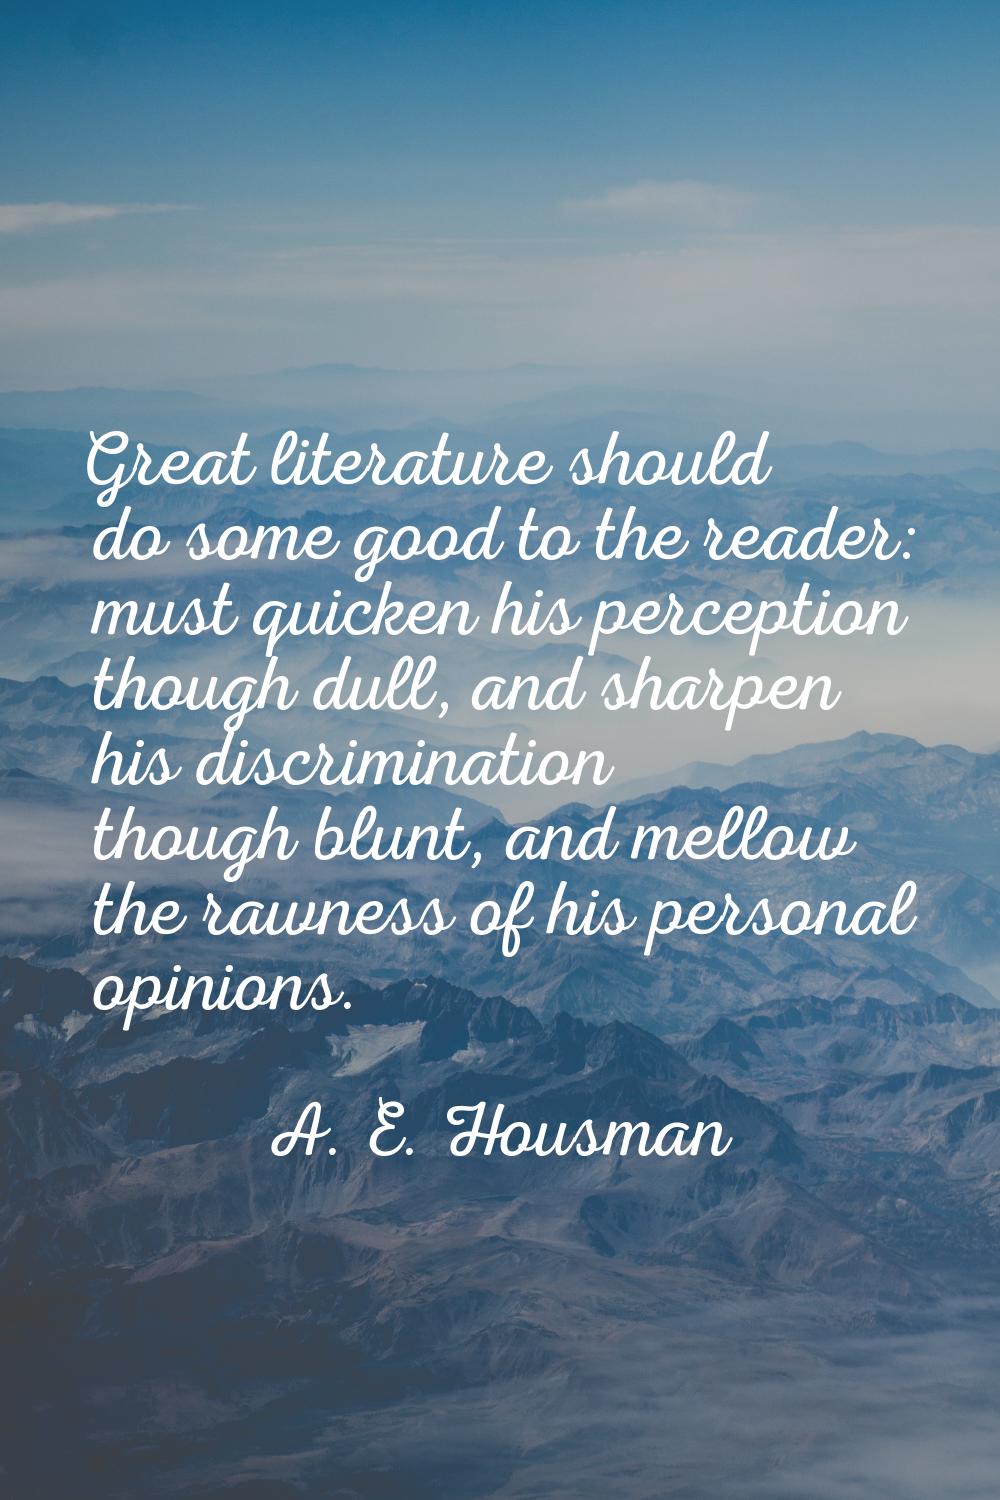 Great literature should do some good to the reader: must quicken his perception though dull, and sh